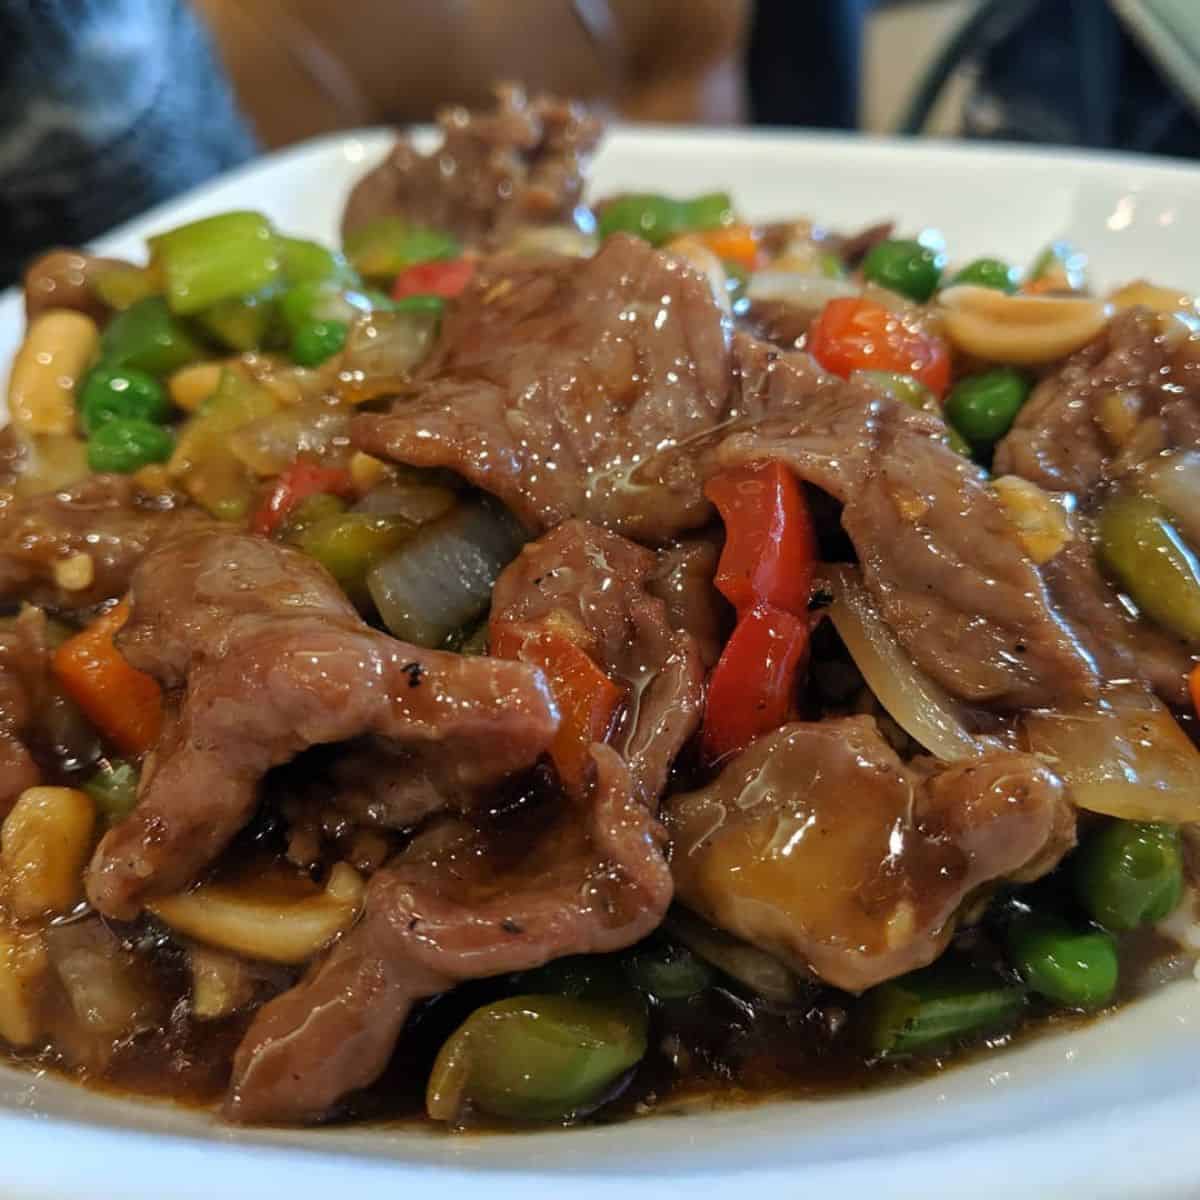 Savoury Kung Pao Beef serving with sticky sauce